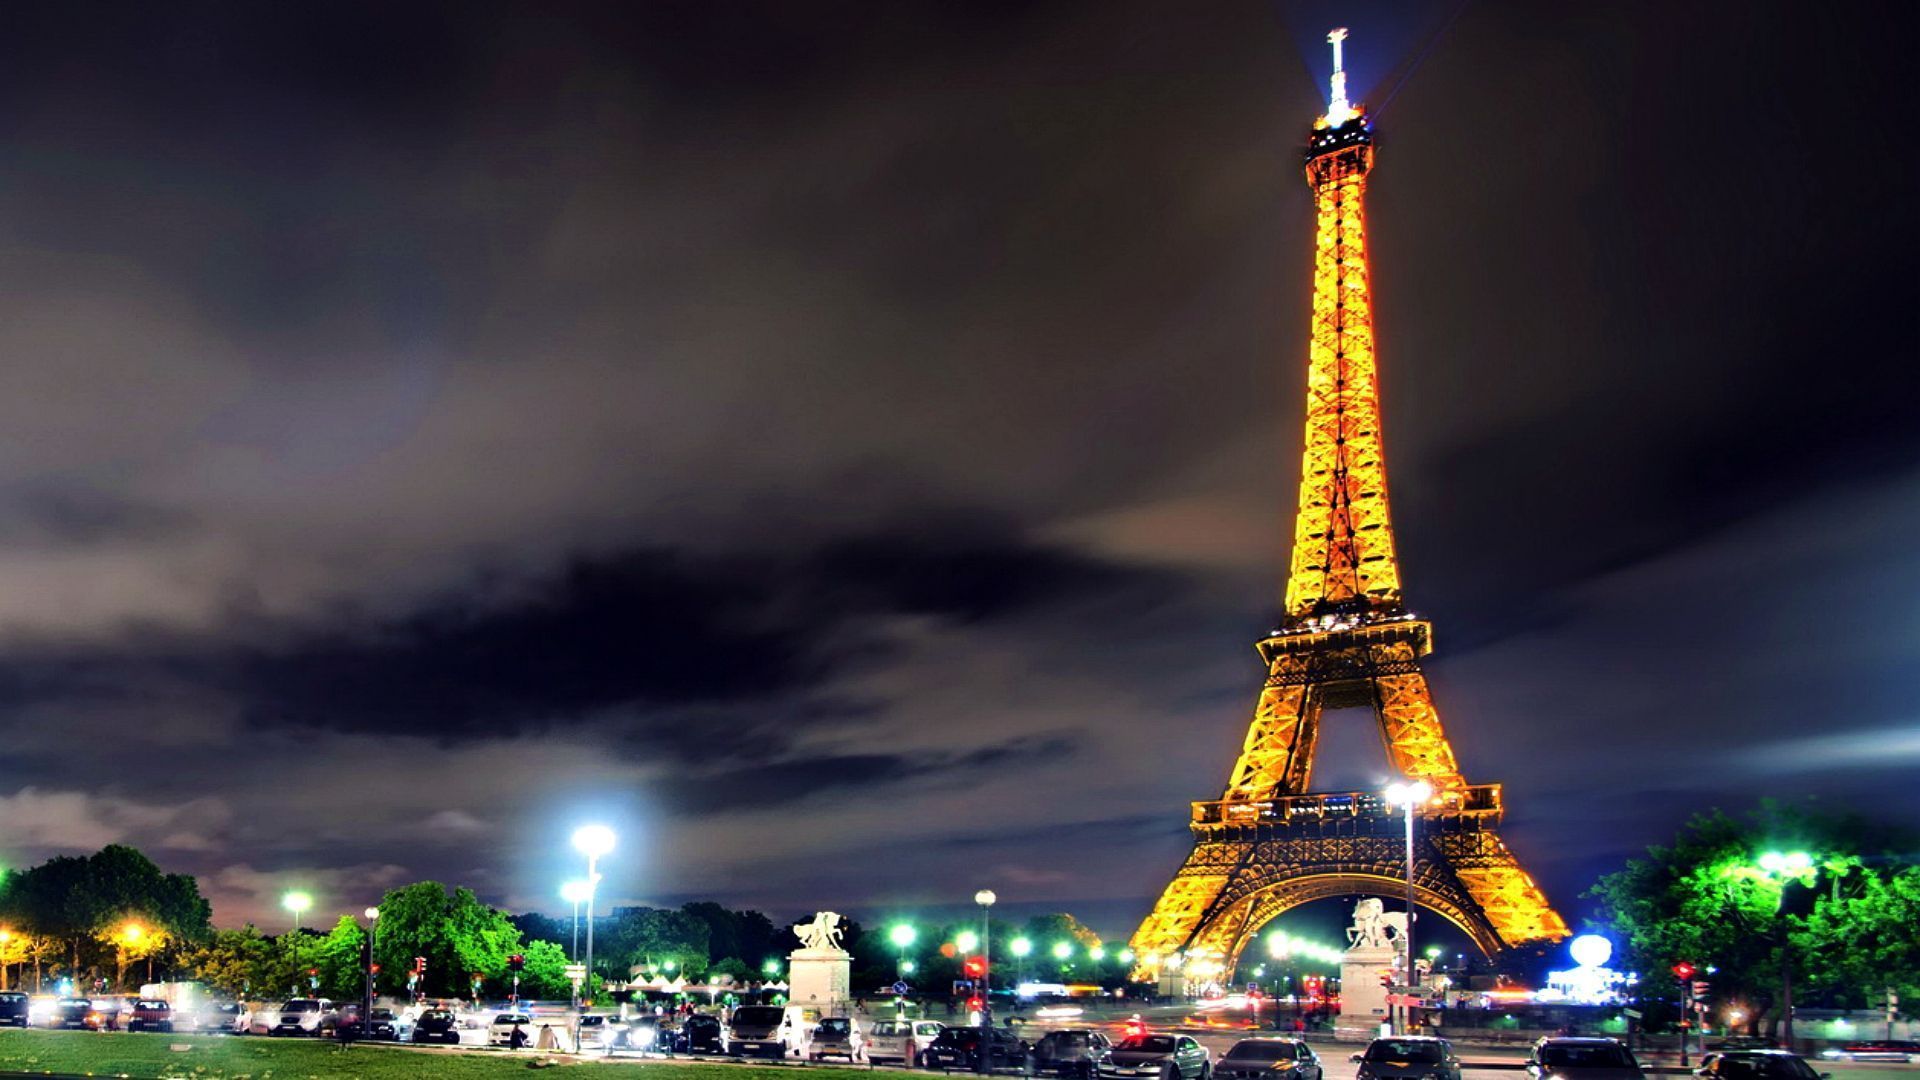 Px Nice HD Background Of Eiffel Tower Full 1080p